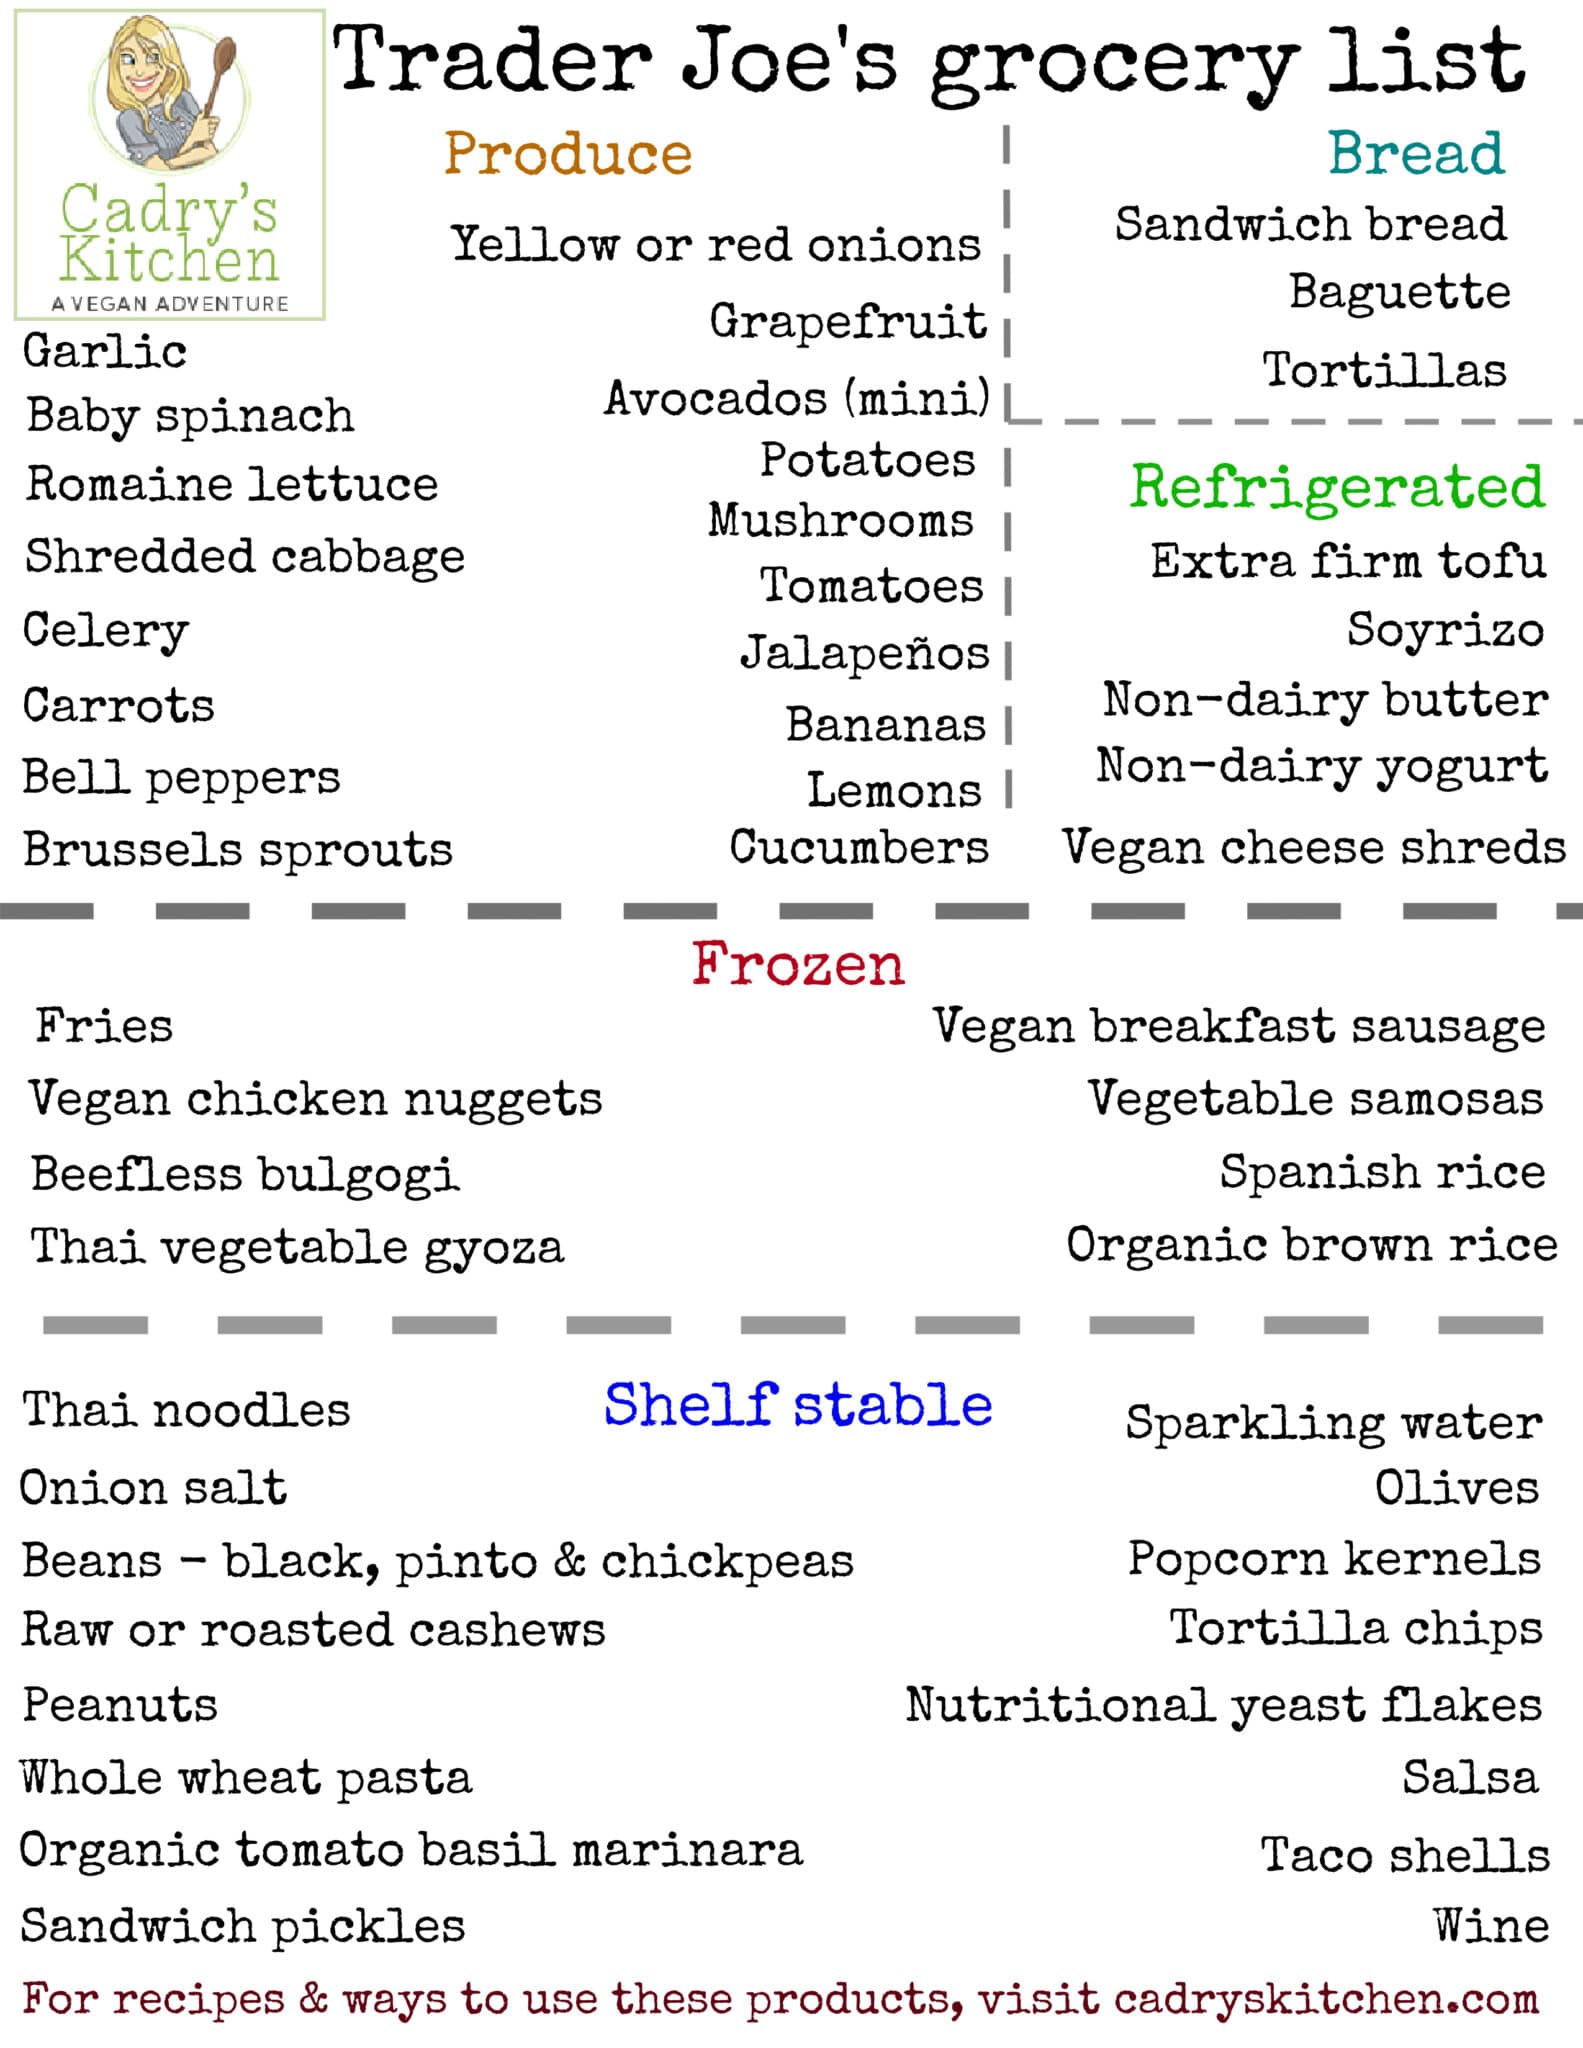 Trader Joe's grocery list categorized by produce, bread, refrigerated, frozen, and shelf stable.